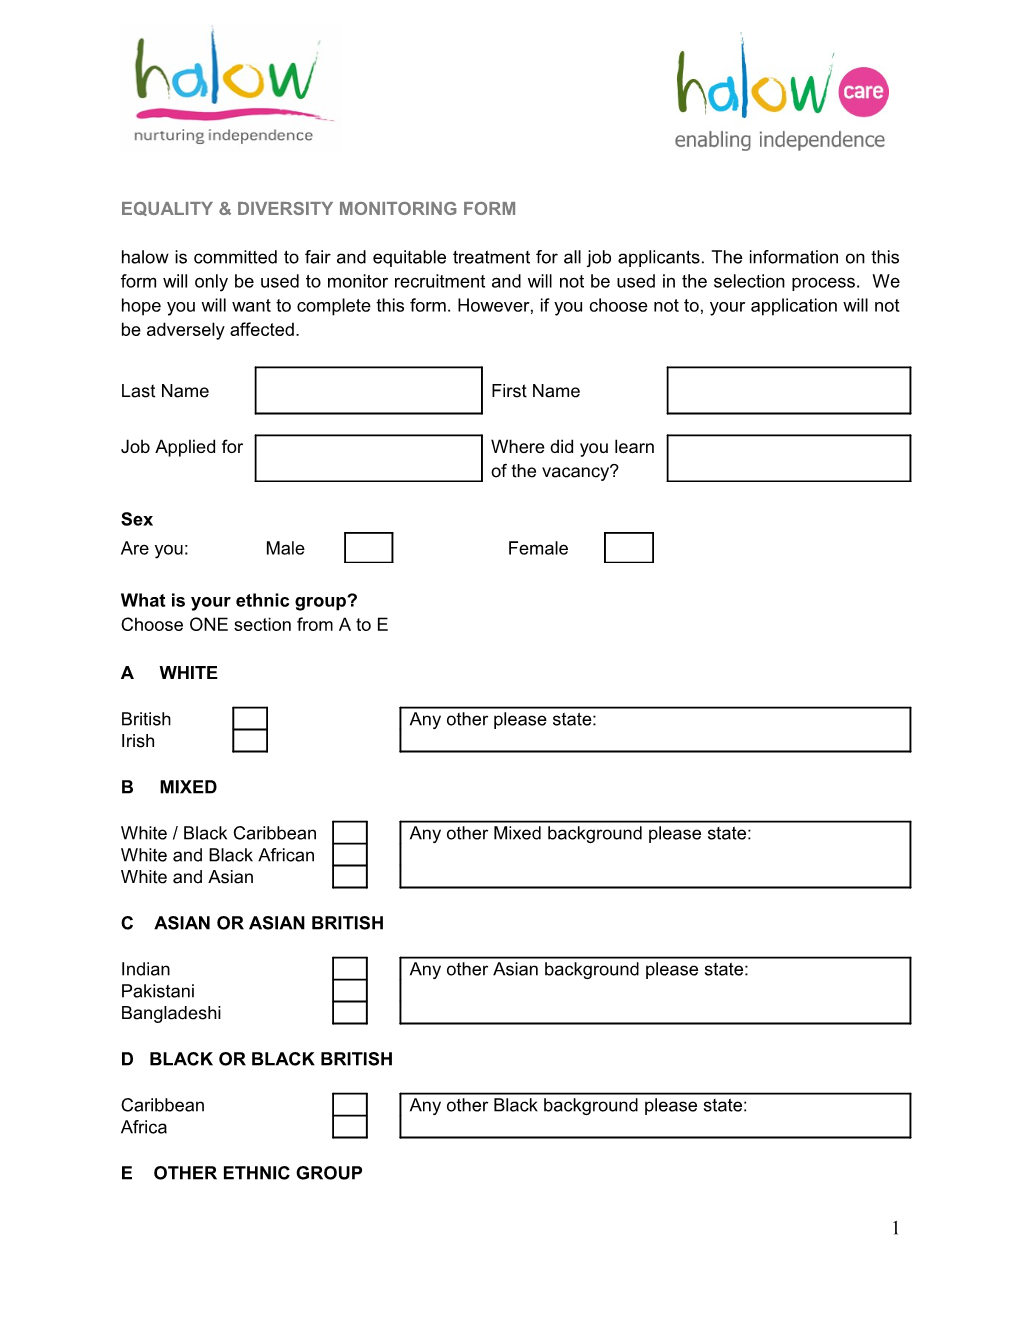 Equality & Diversity Monitoring Form